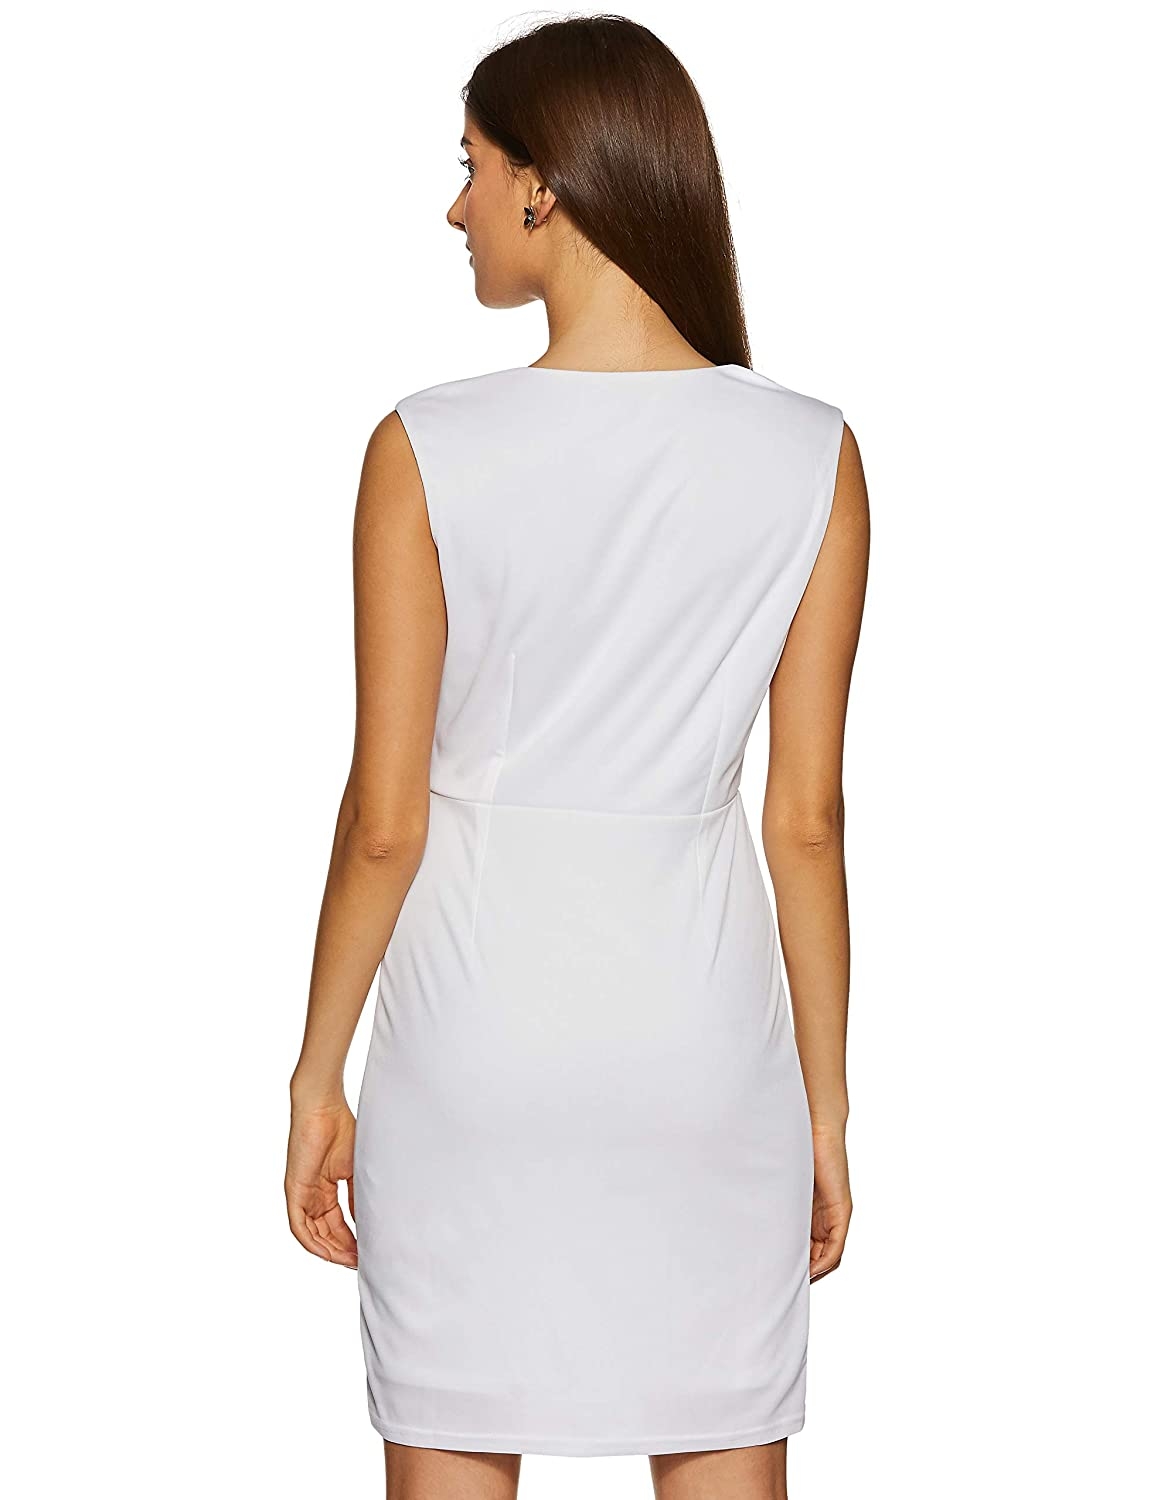 LY2 embroidered detail v-neck bodycon Dress